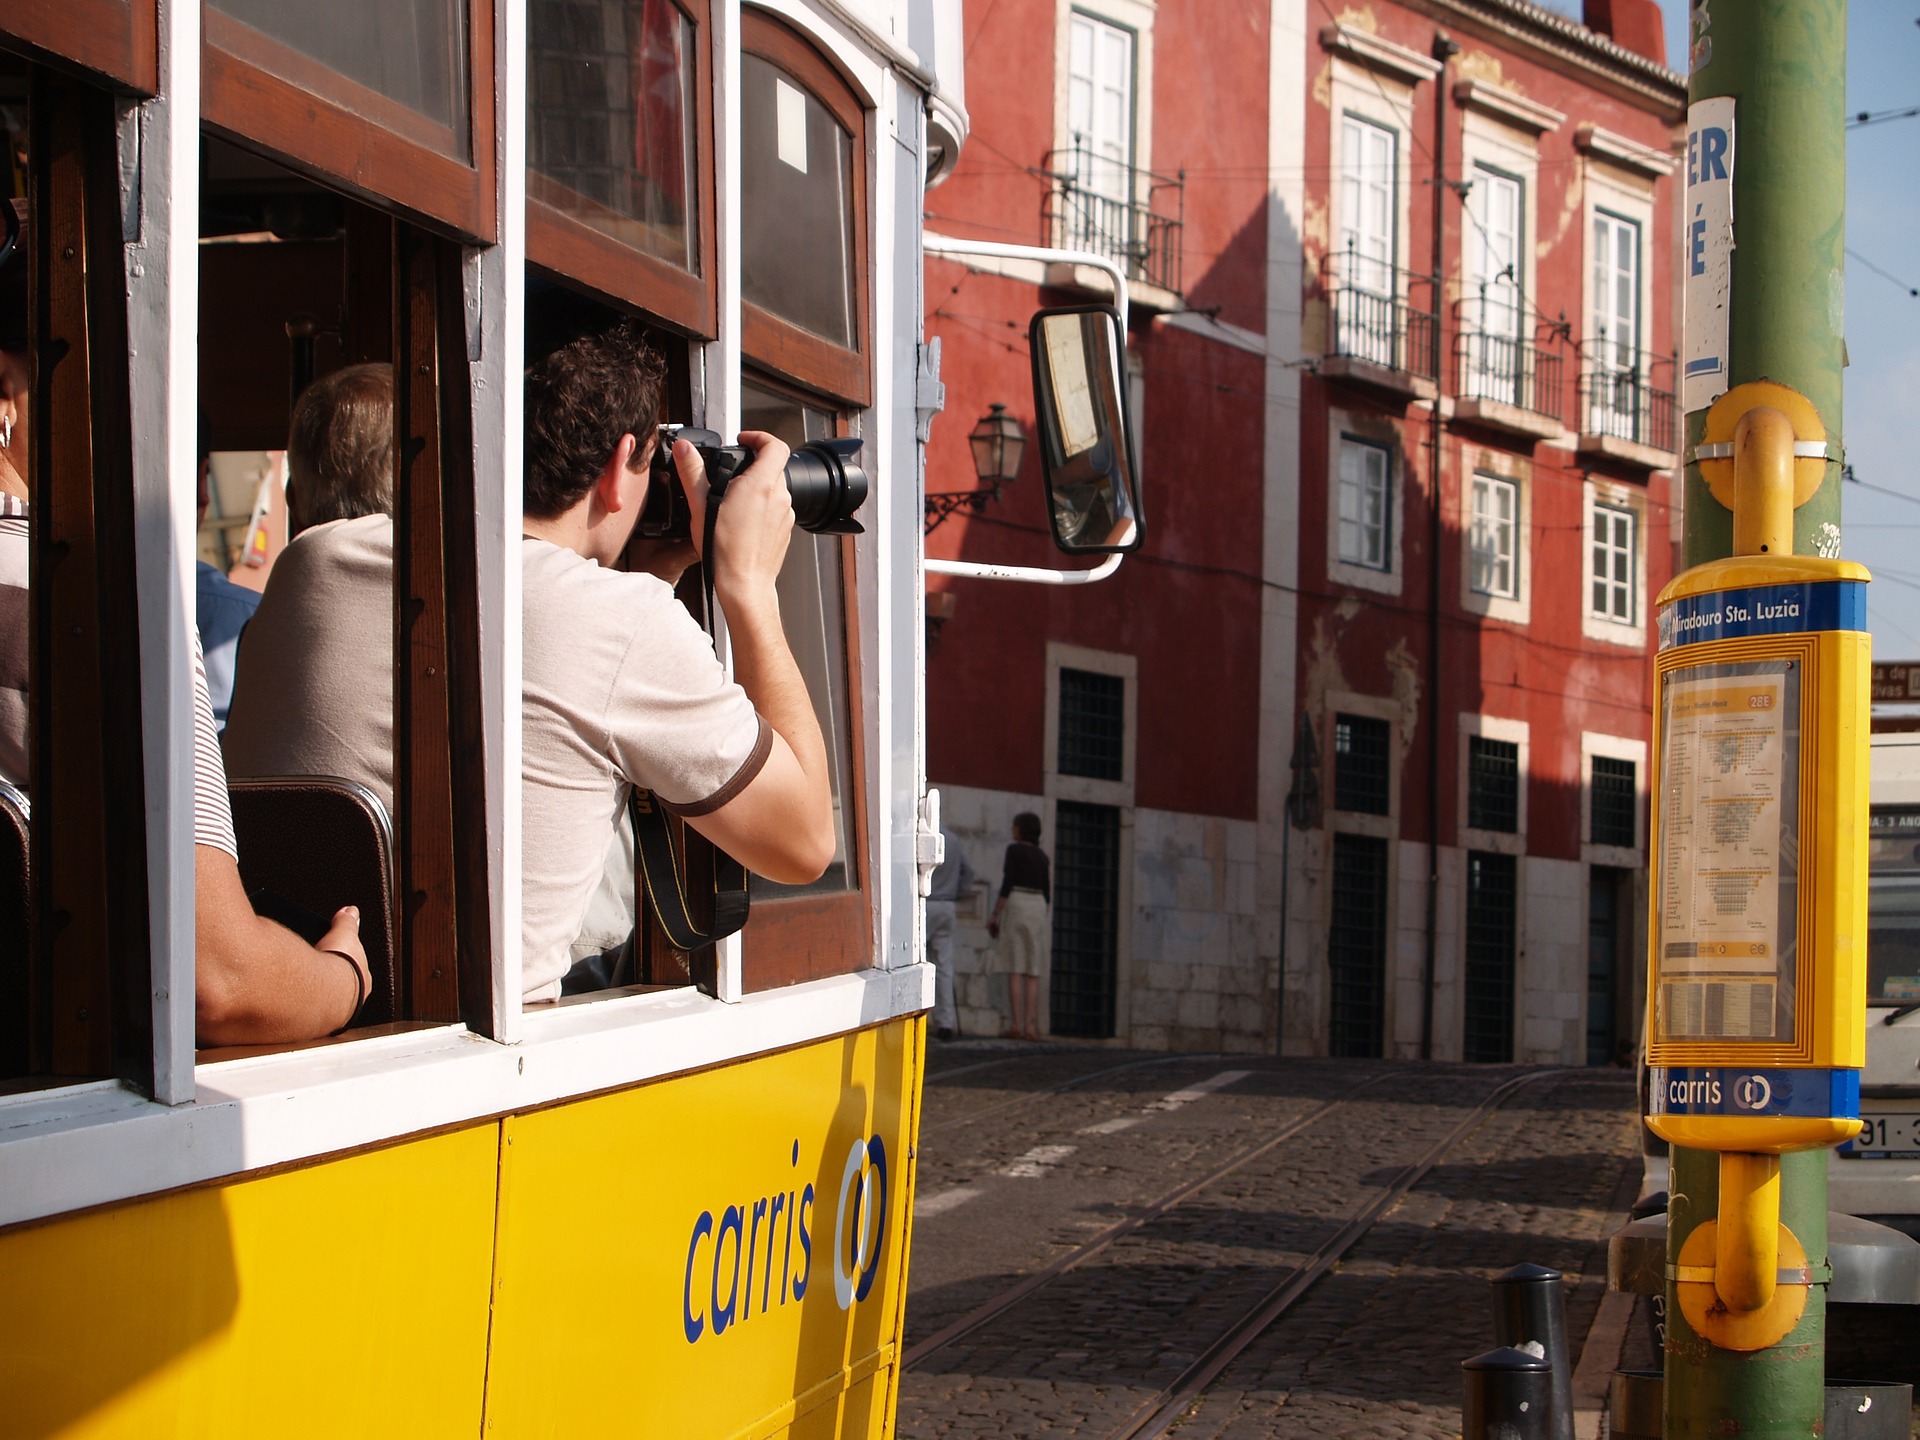 Tourism continues to set records in Portugal